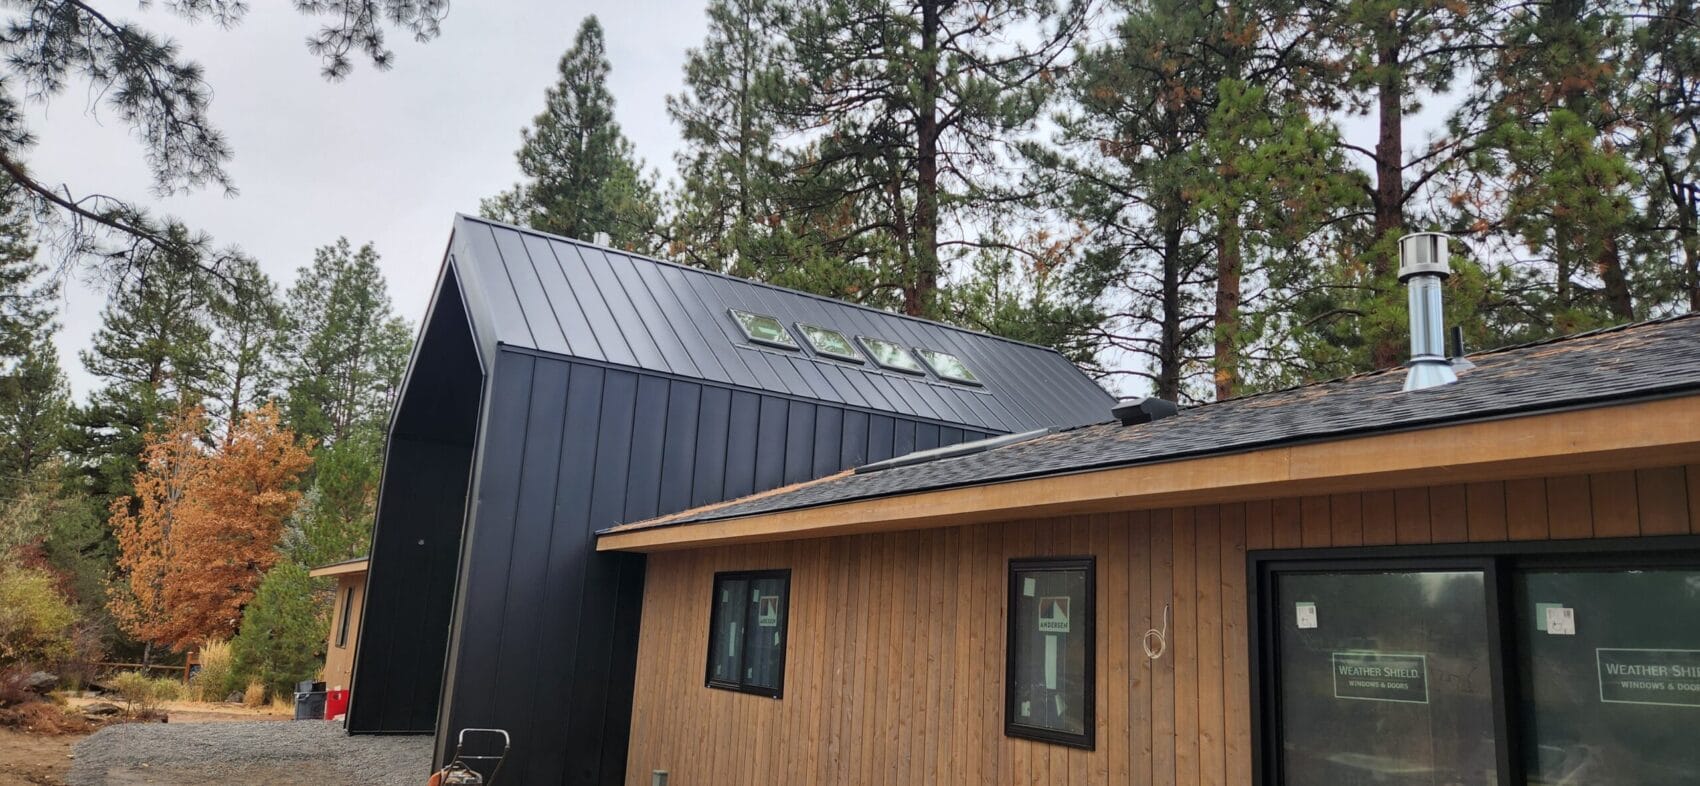 New shingle roof on wooden building